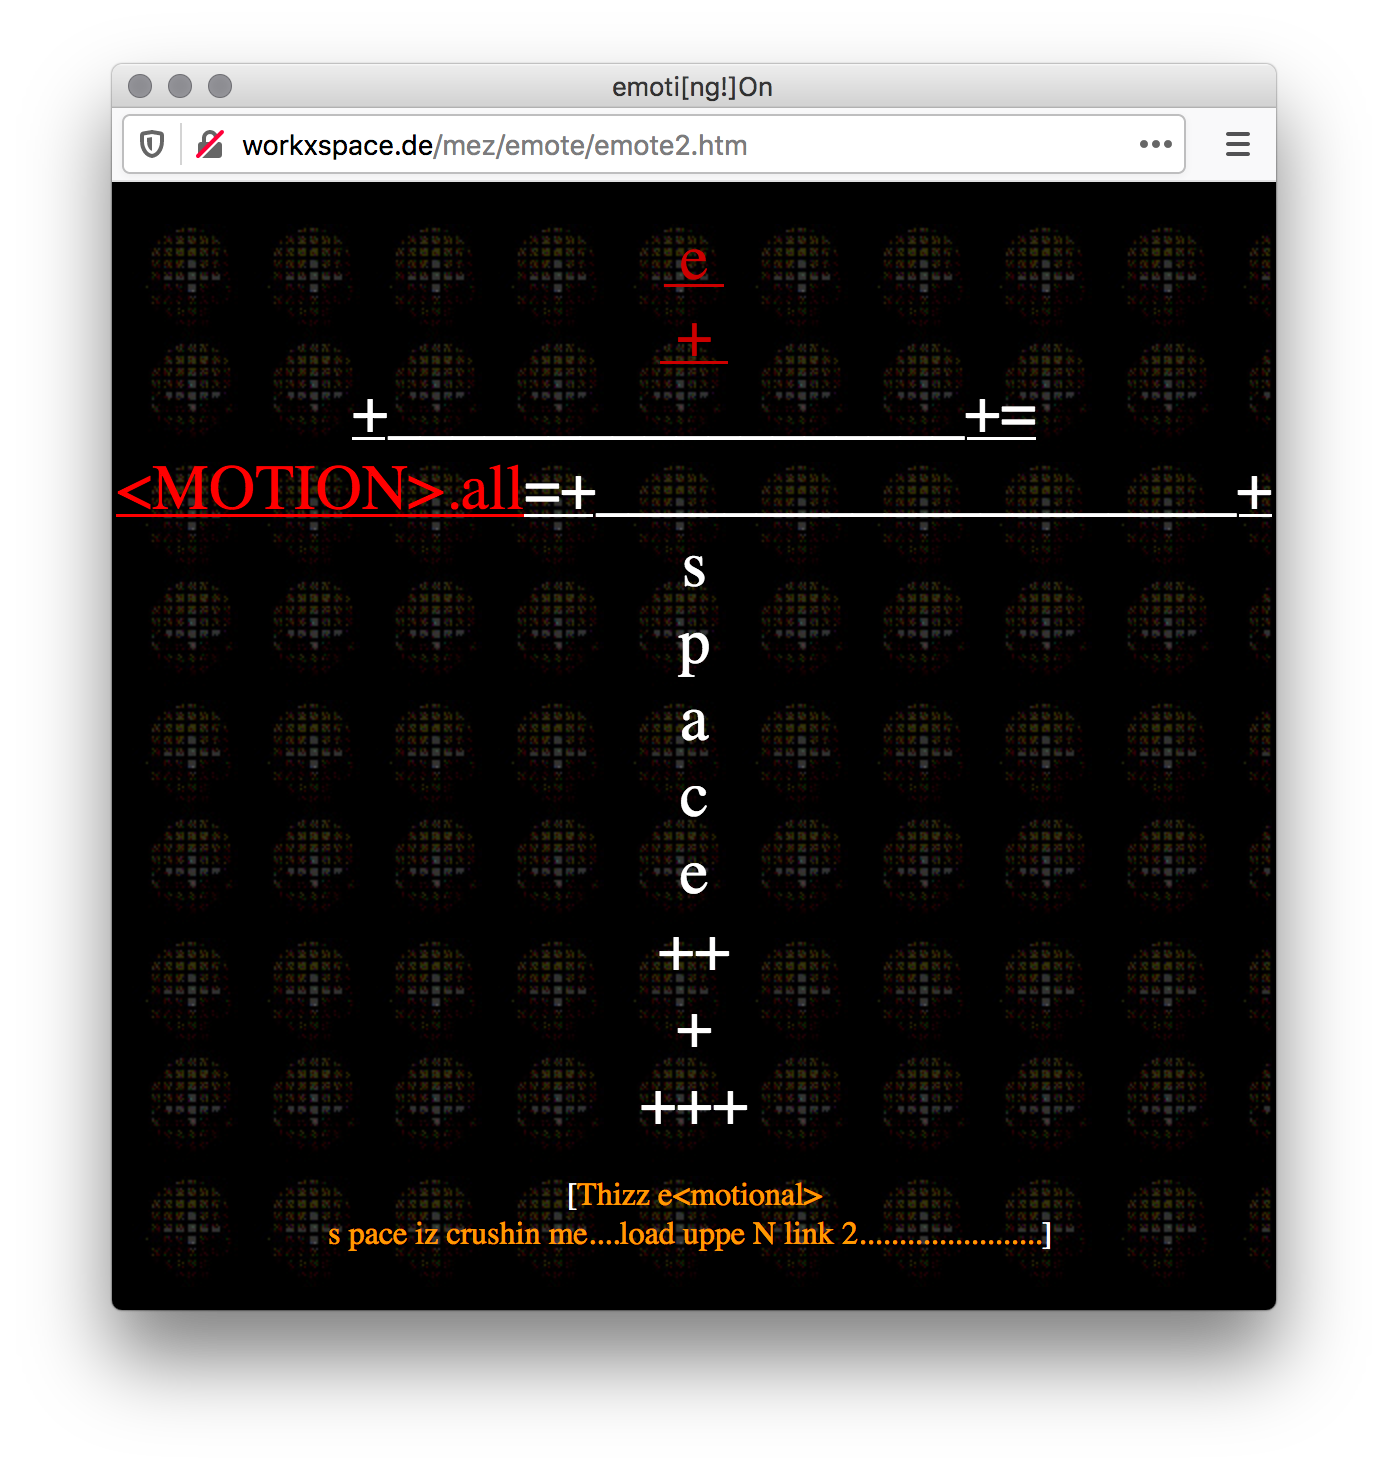 Screenshot of a webpage with a black background and tiles of spheres created by small square images. Red letters and text and white math symbols form the shape of a cross in the middle of the page. Orange incomprehensible text is on the bottom.